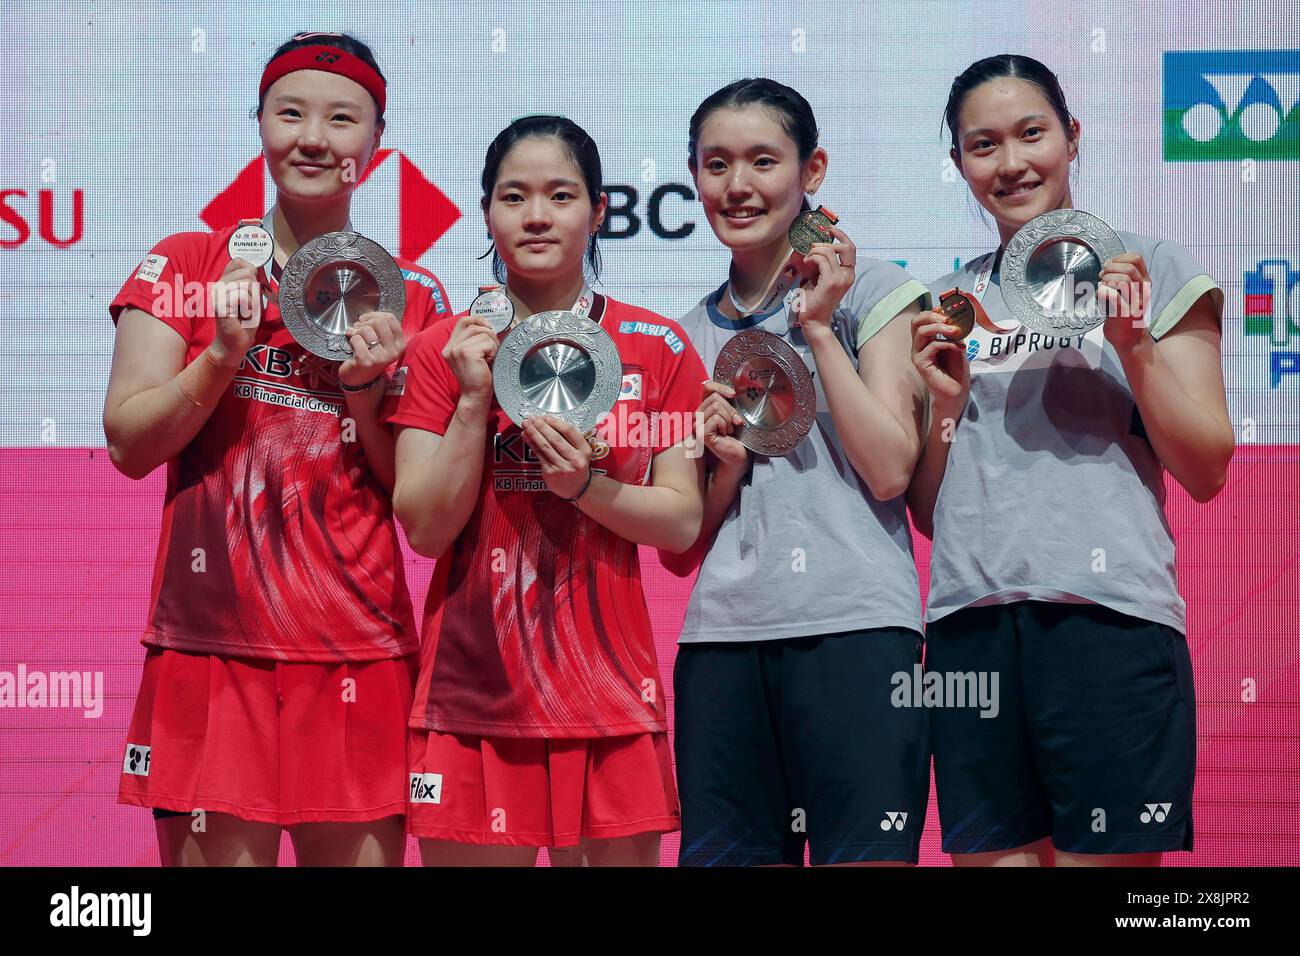 Kuala Lumpur, Malaysia. 26th May, 2024. (L-R) Shin Seung Chan and Lee Yu Lim of Korea, Rin Iwanaga and Kie Nakanishi of Japan pose for photos with their medals at the victory ceremony after the Women's Doubles Final match of the Perodua Malaysia Masters 2024 at Axiata Arena. Rin Iwanaga and Kie Nakanishi won with scores; 17/21/21 : 21/19/18. Credit: SOPA Images Limited/Alamy Live News Stock Photo